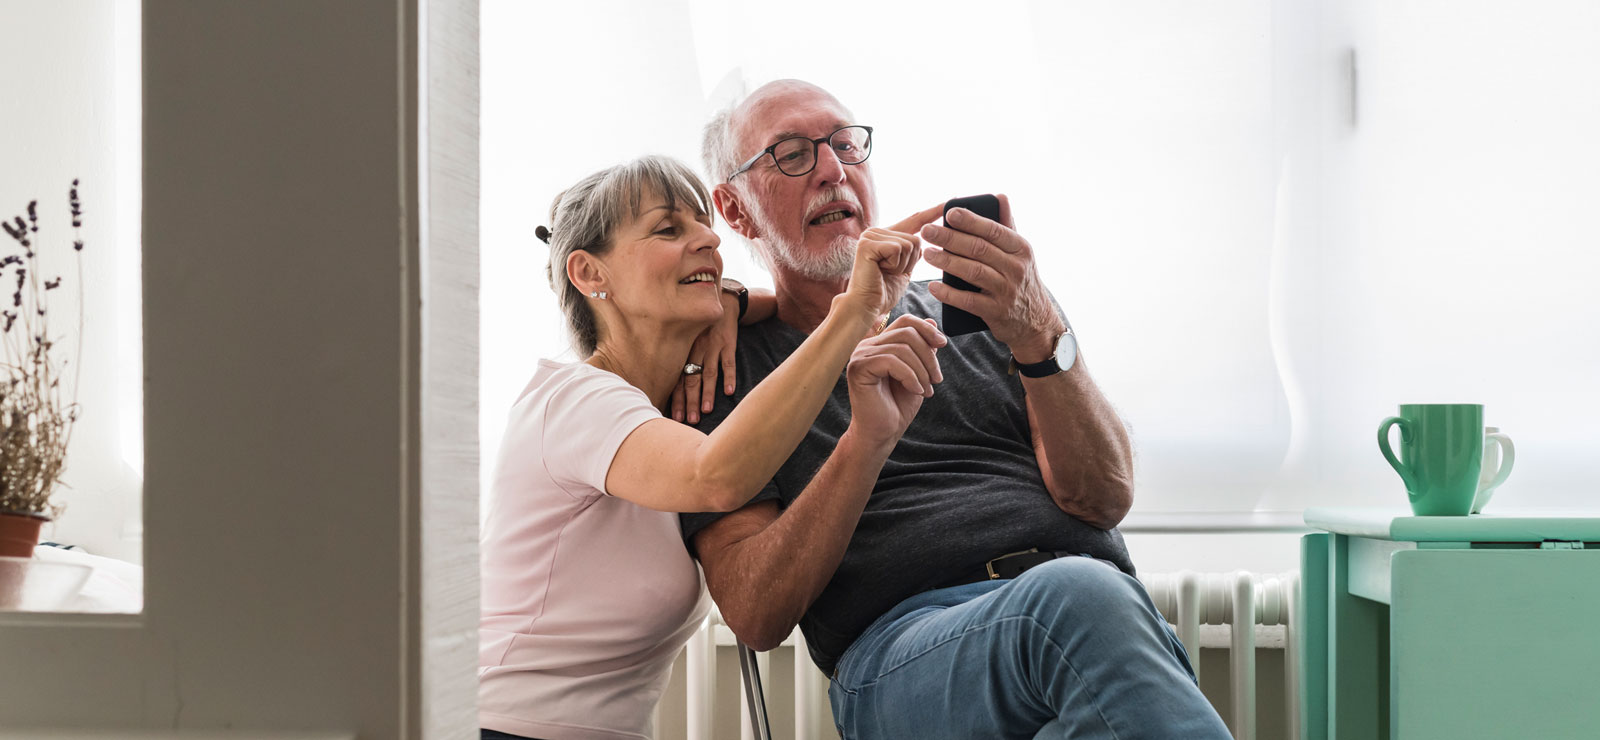 Two people look at a smartphone screen together.